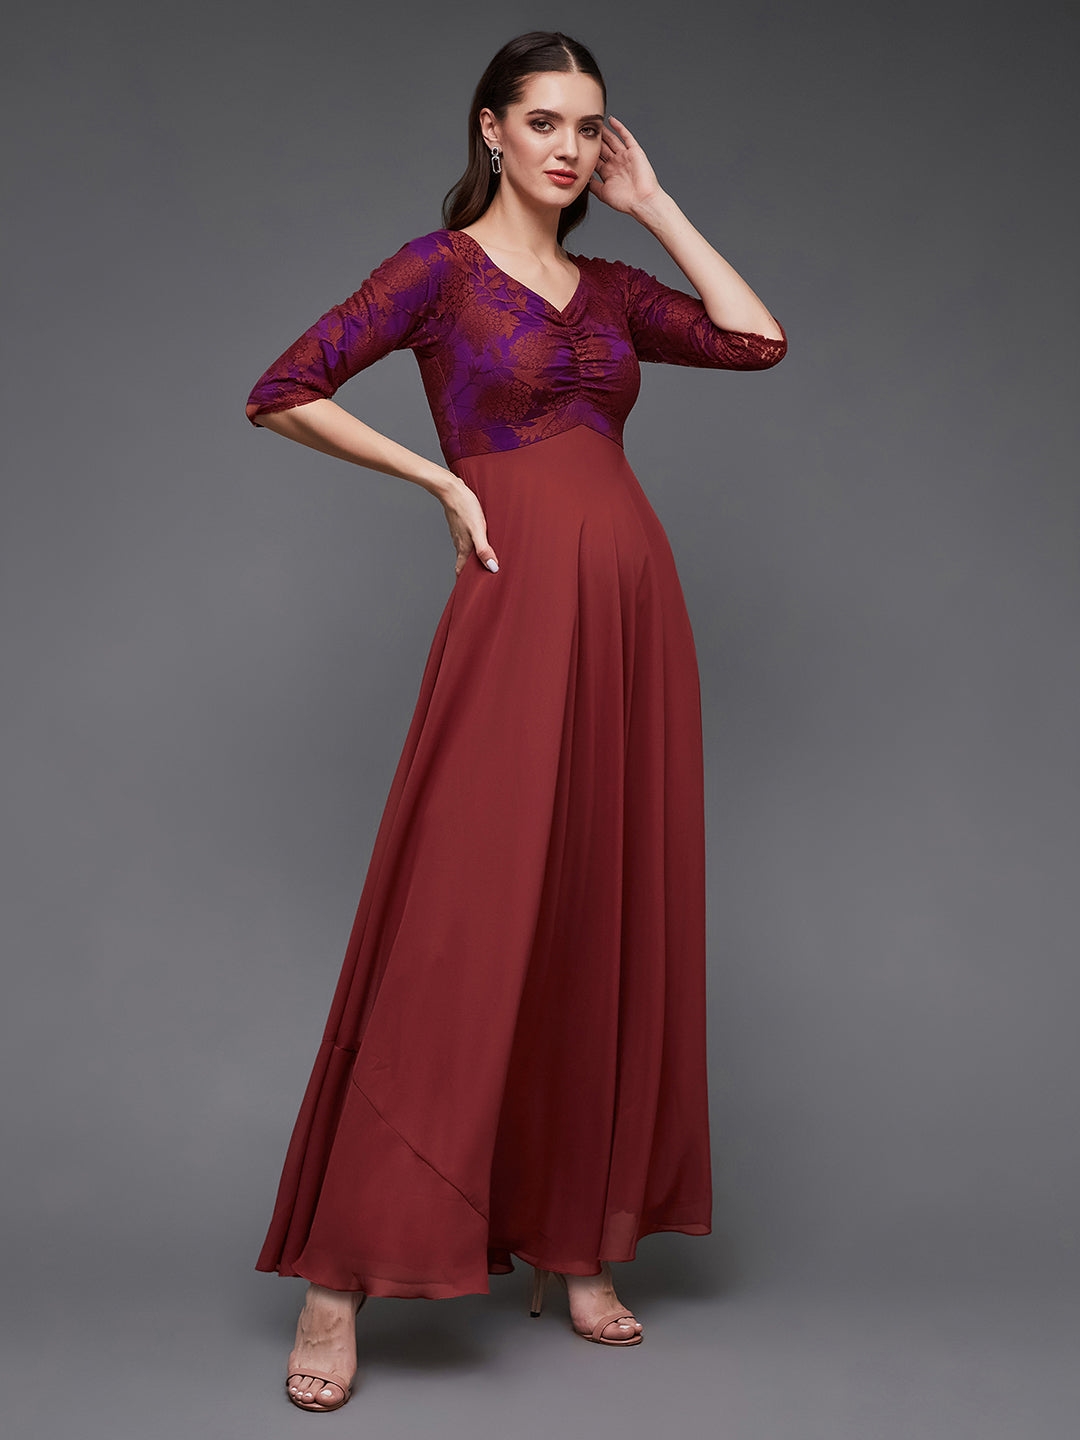 Brick Red Sweet heart neck 3/4 Sleeve Self Design Fit & Flare Maxi Dress